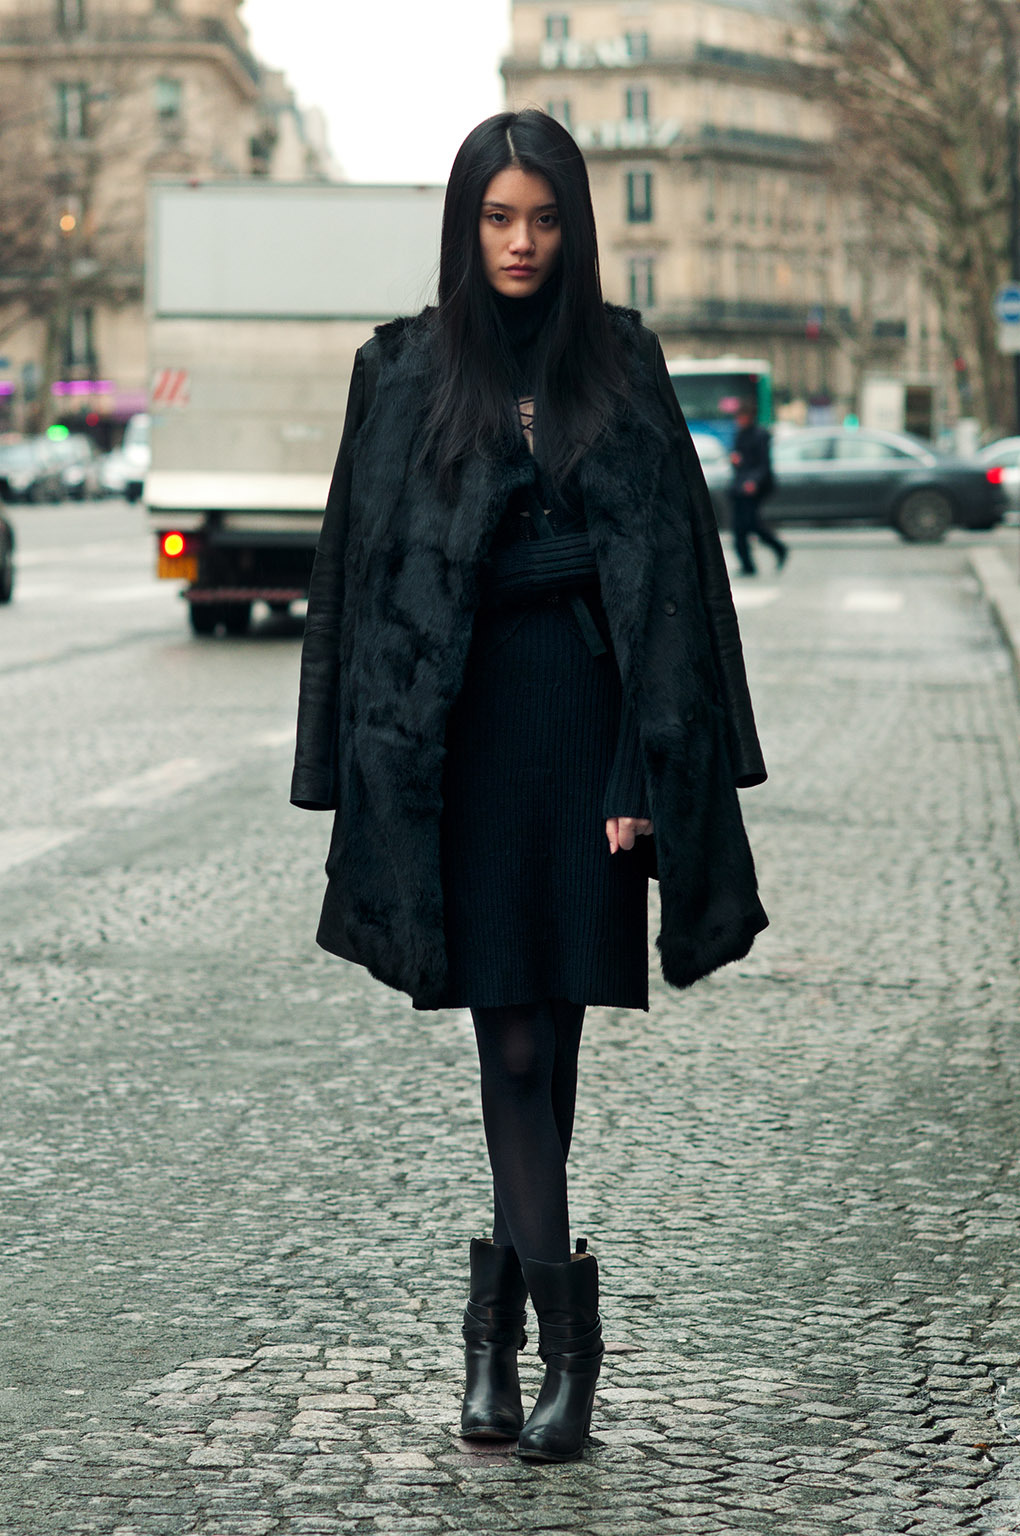 jeou: “black is the color of my hair, my eyes and my spirit”- ming xi for grey magazine september 2012 